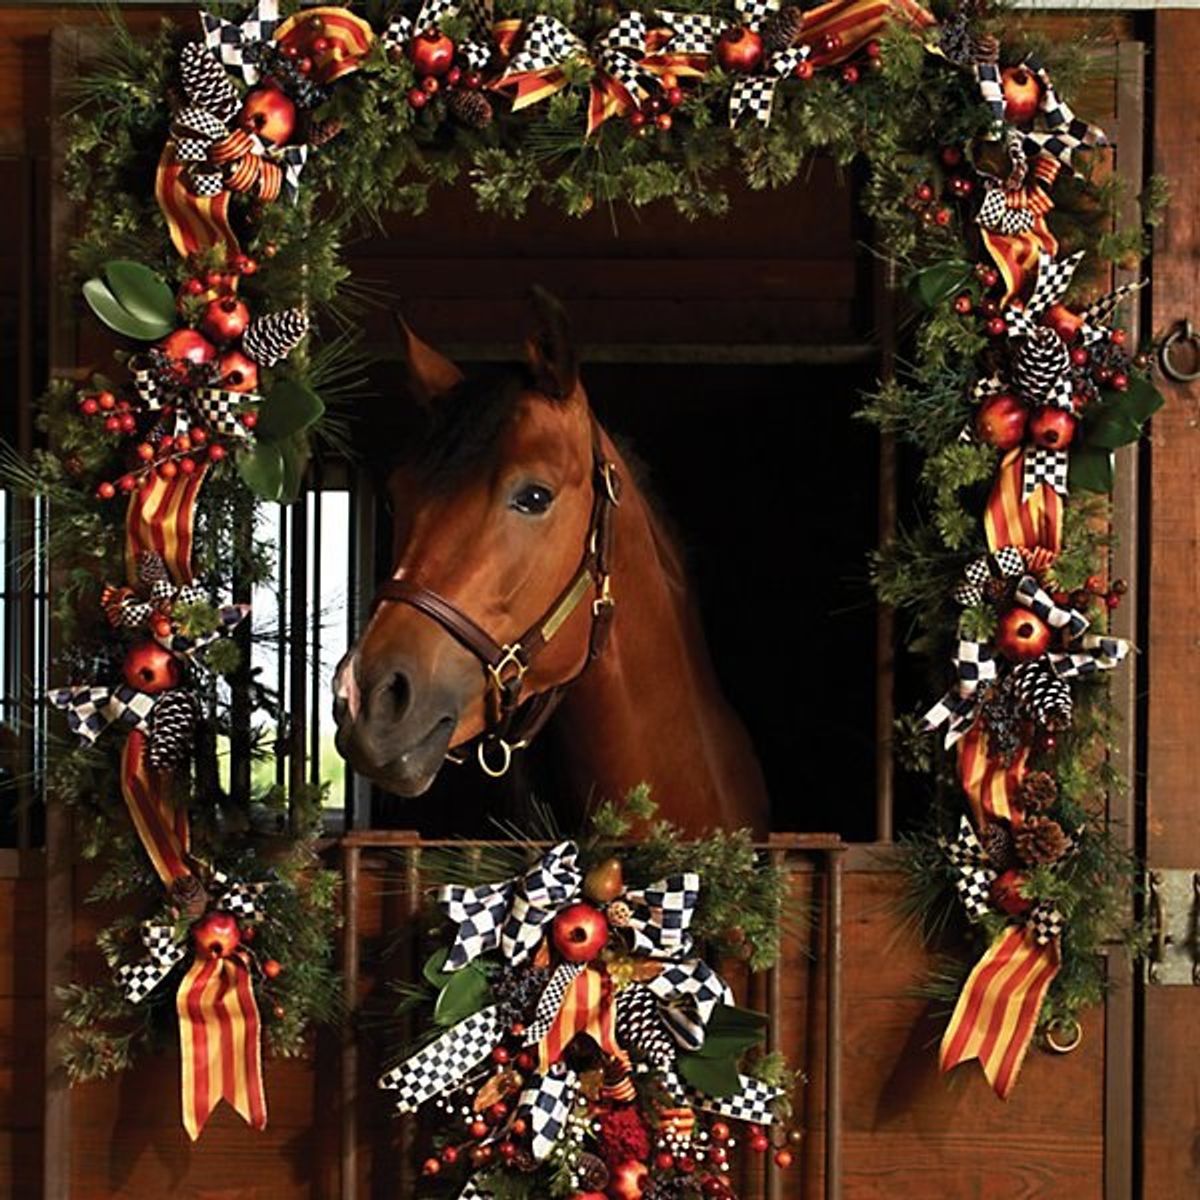 20 Christmas Gifts Your Horse Actually Wants